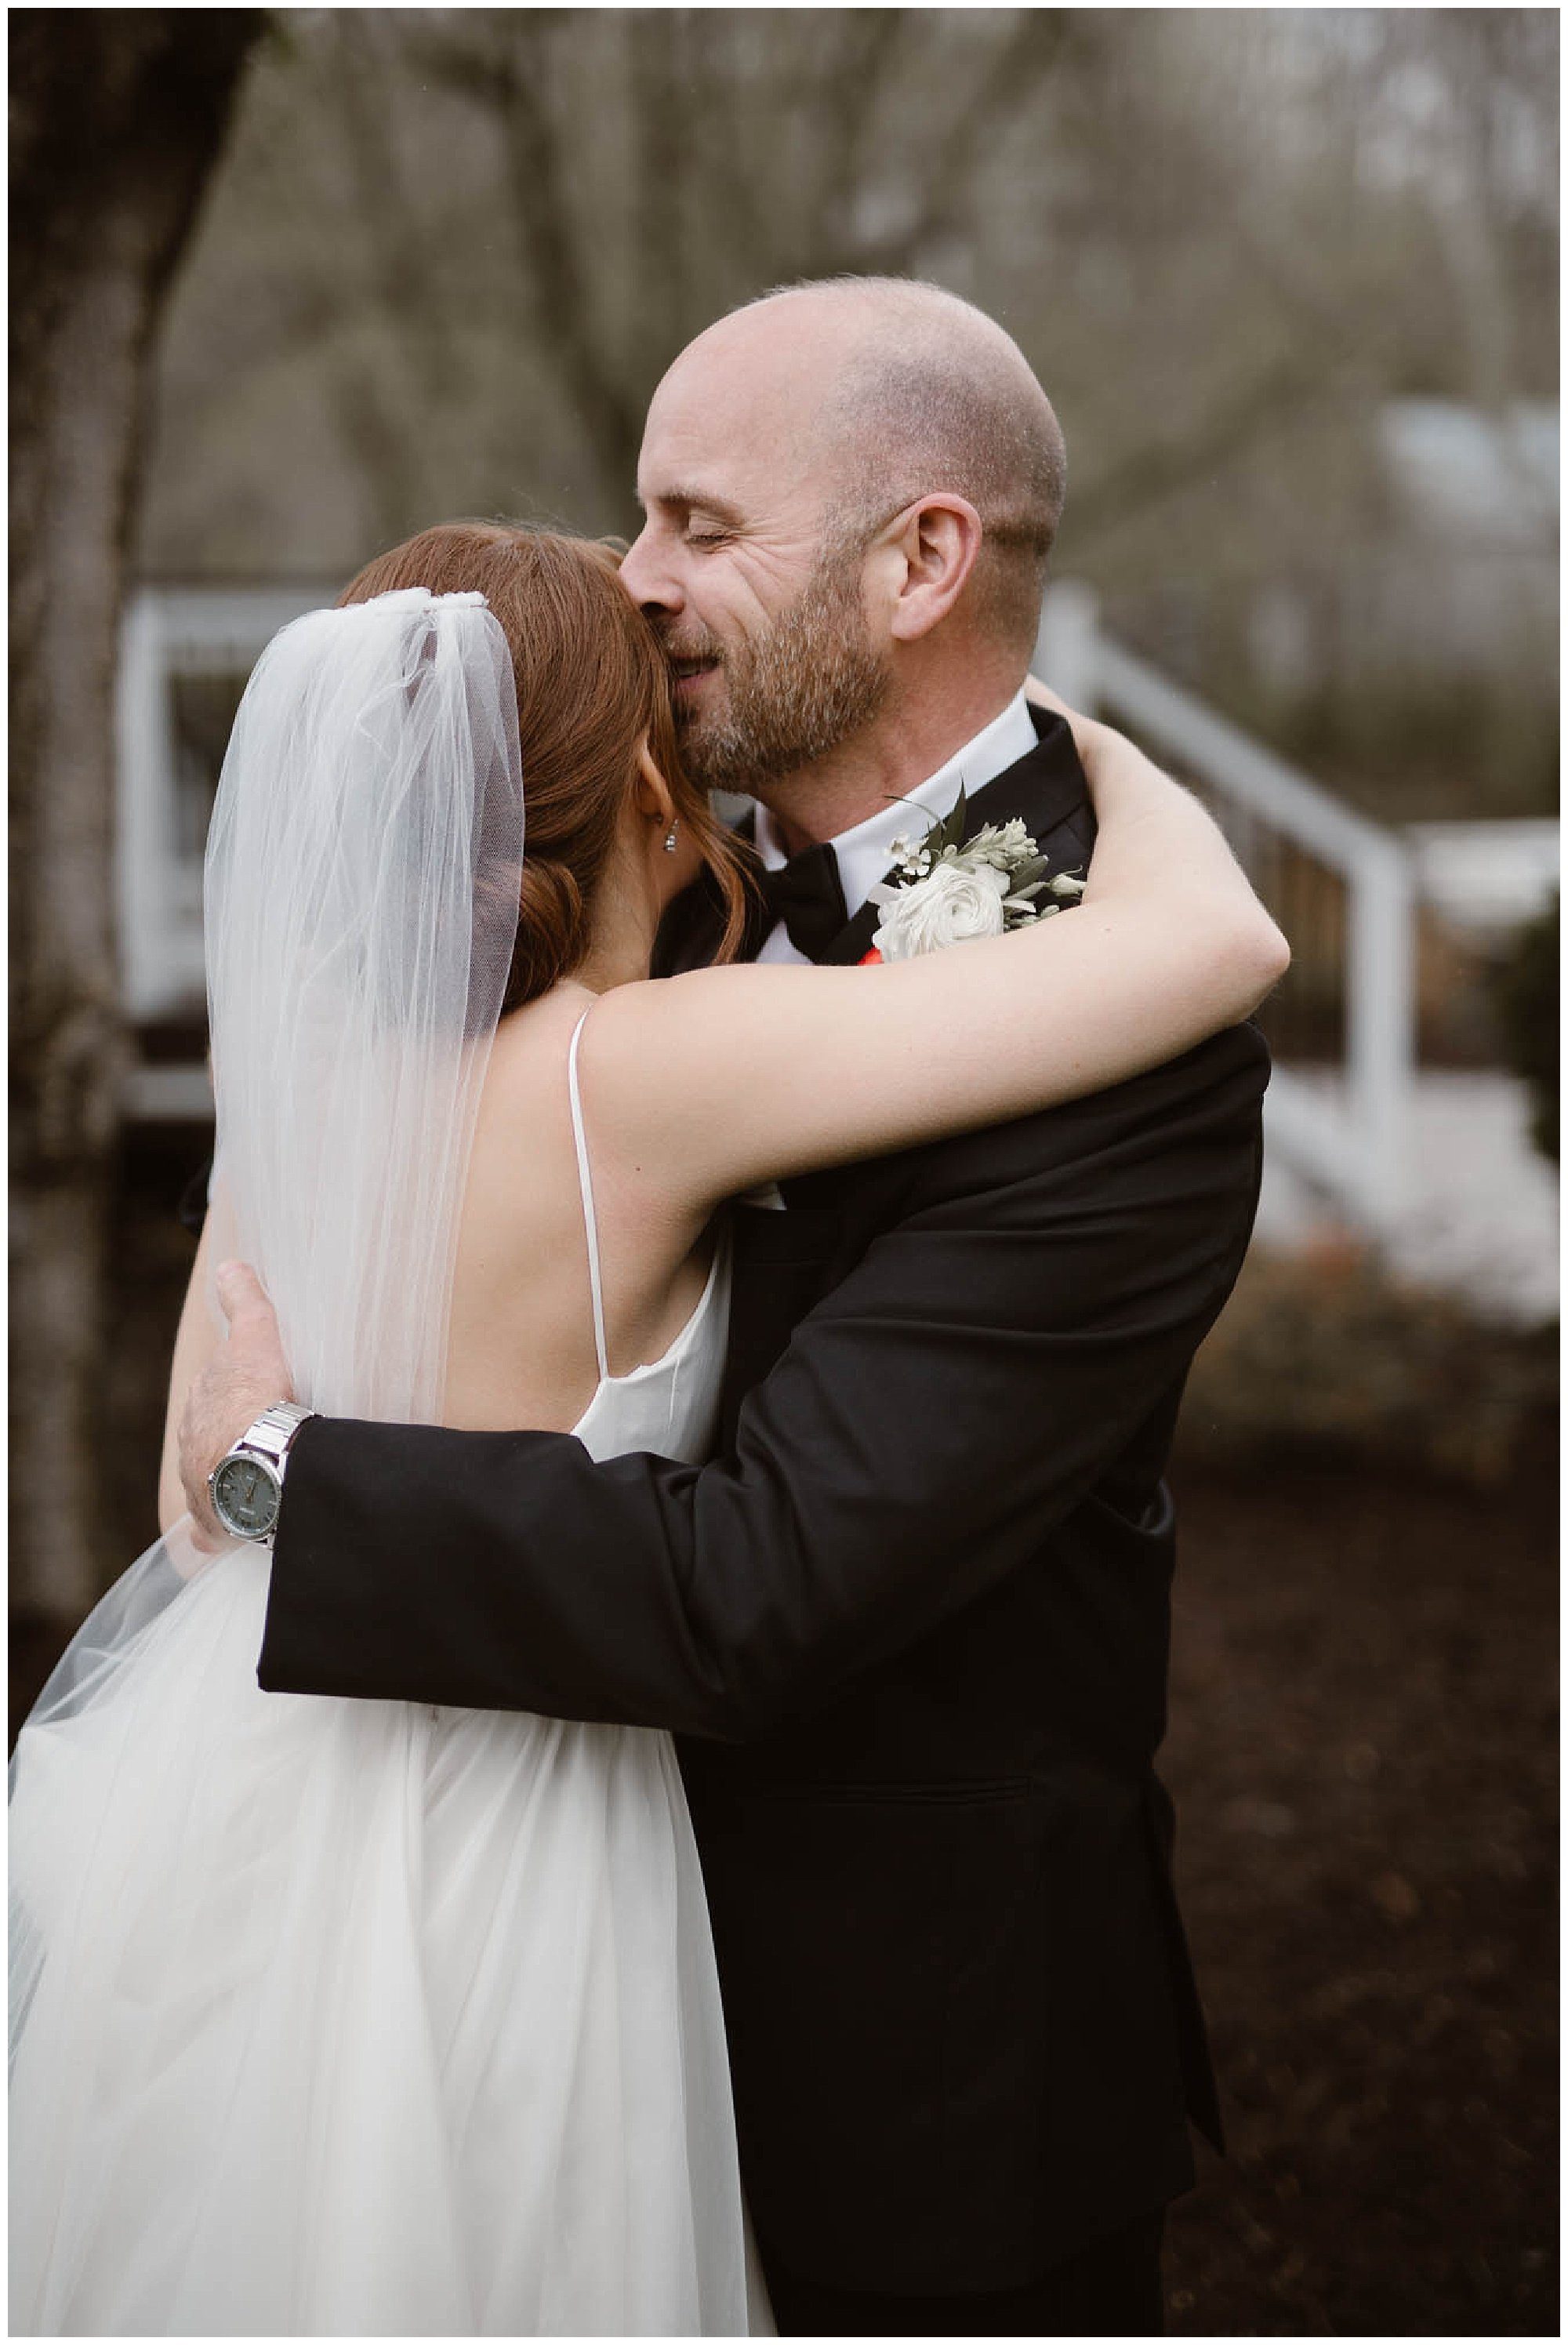 Emotional wedding day photos between bride and father